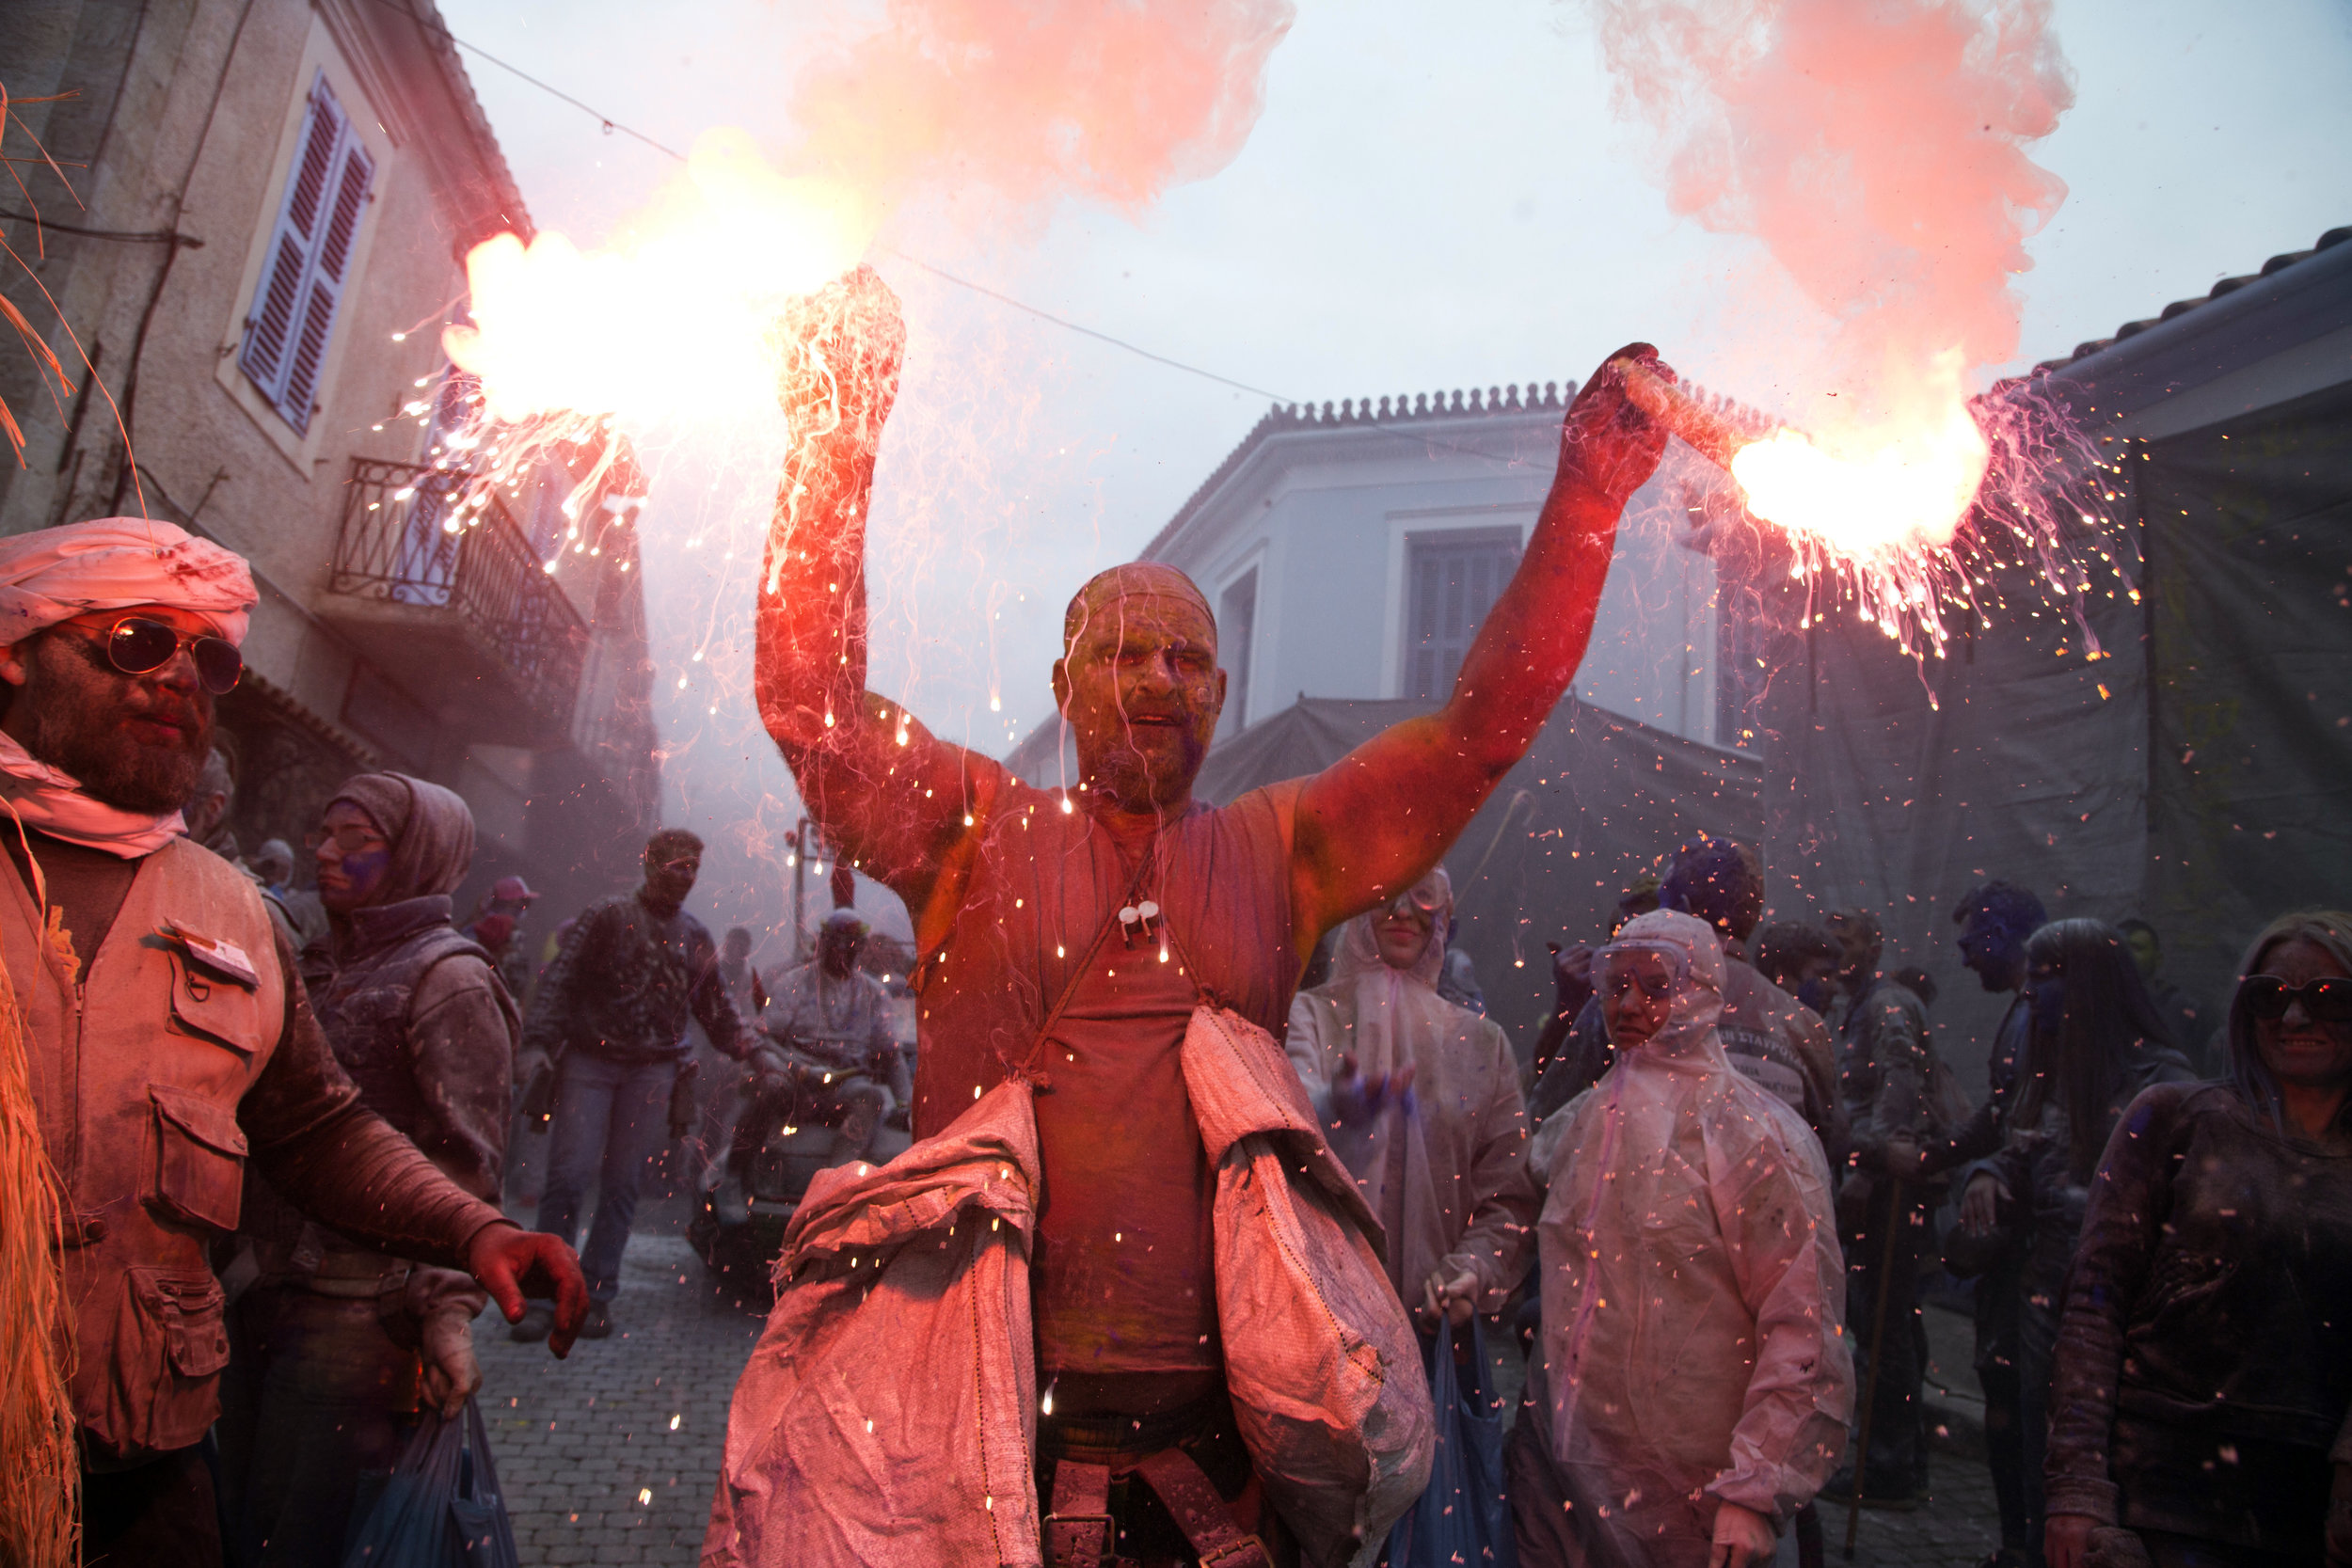  Revelers throw flour as they participate in the flour war, a unique colorful flour fight marking the end of the carnival season, in the port town of Galaxidi, some 200 kilometers (120 miles) west of Athens, Monday, Feb. 19, 2018. (AP Photo/Petros Gi